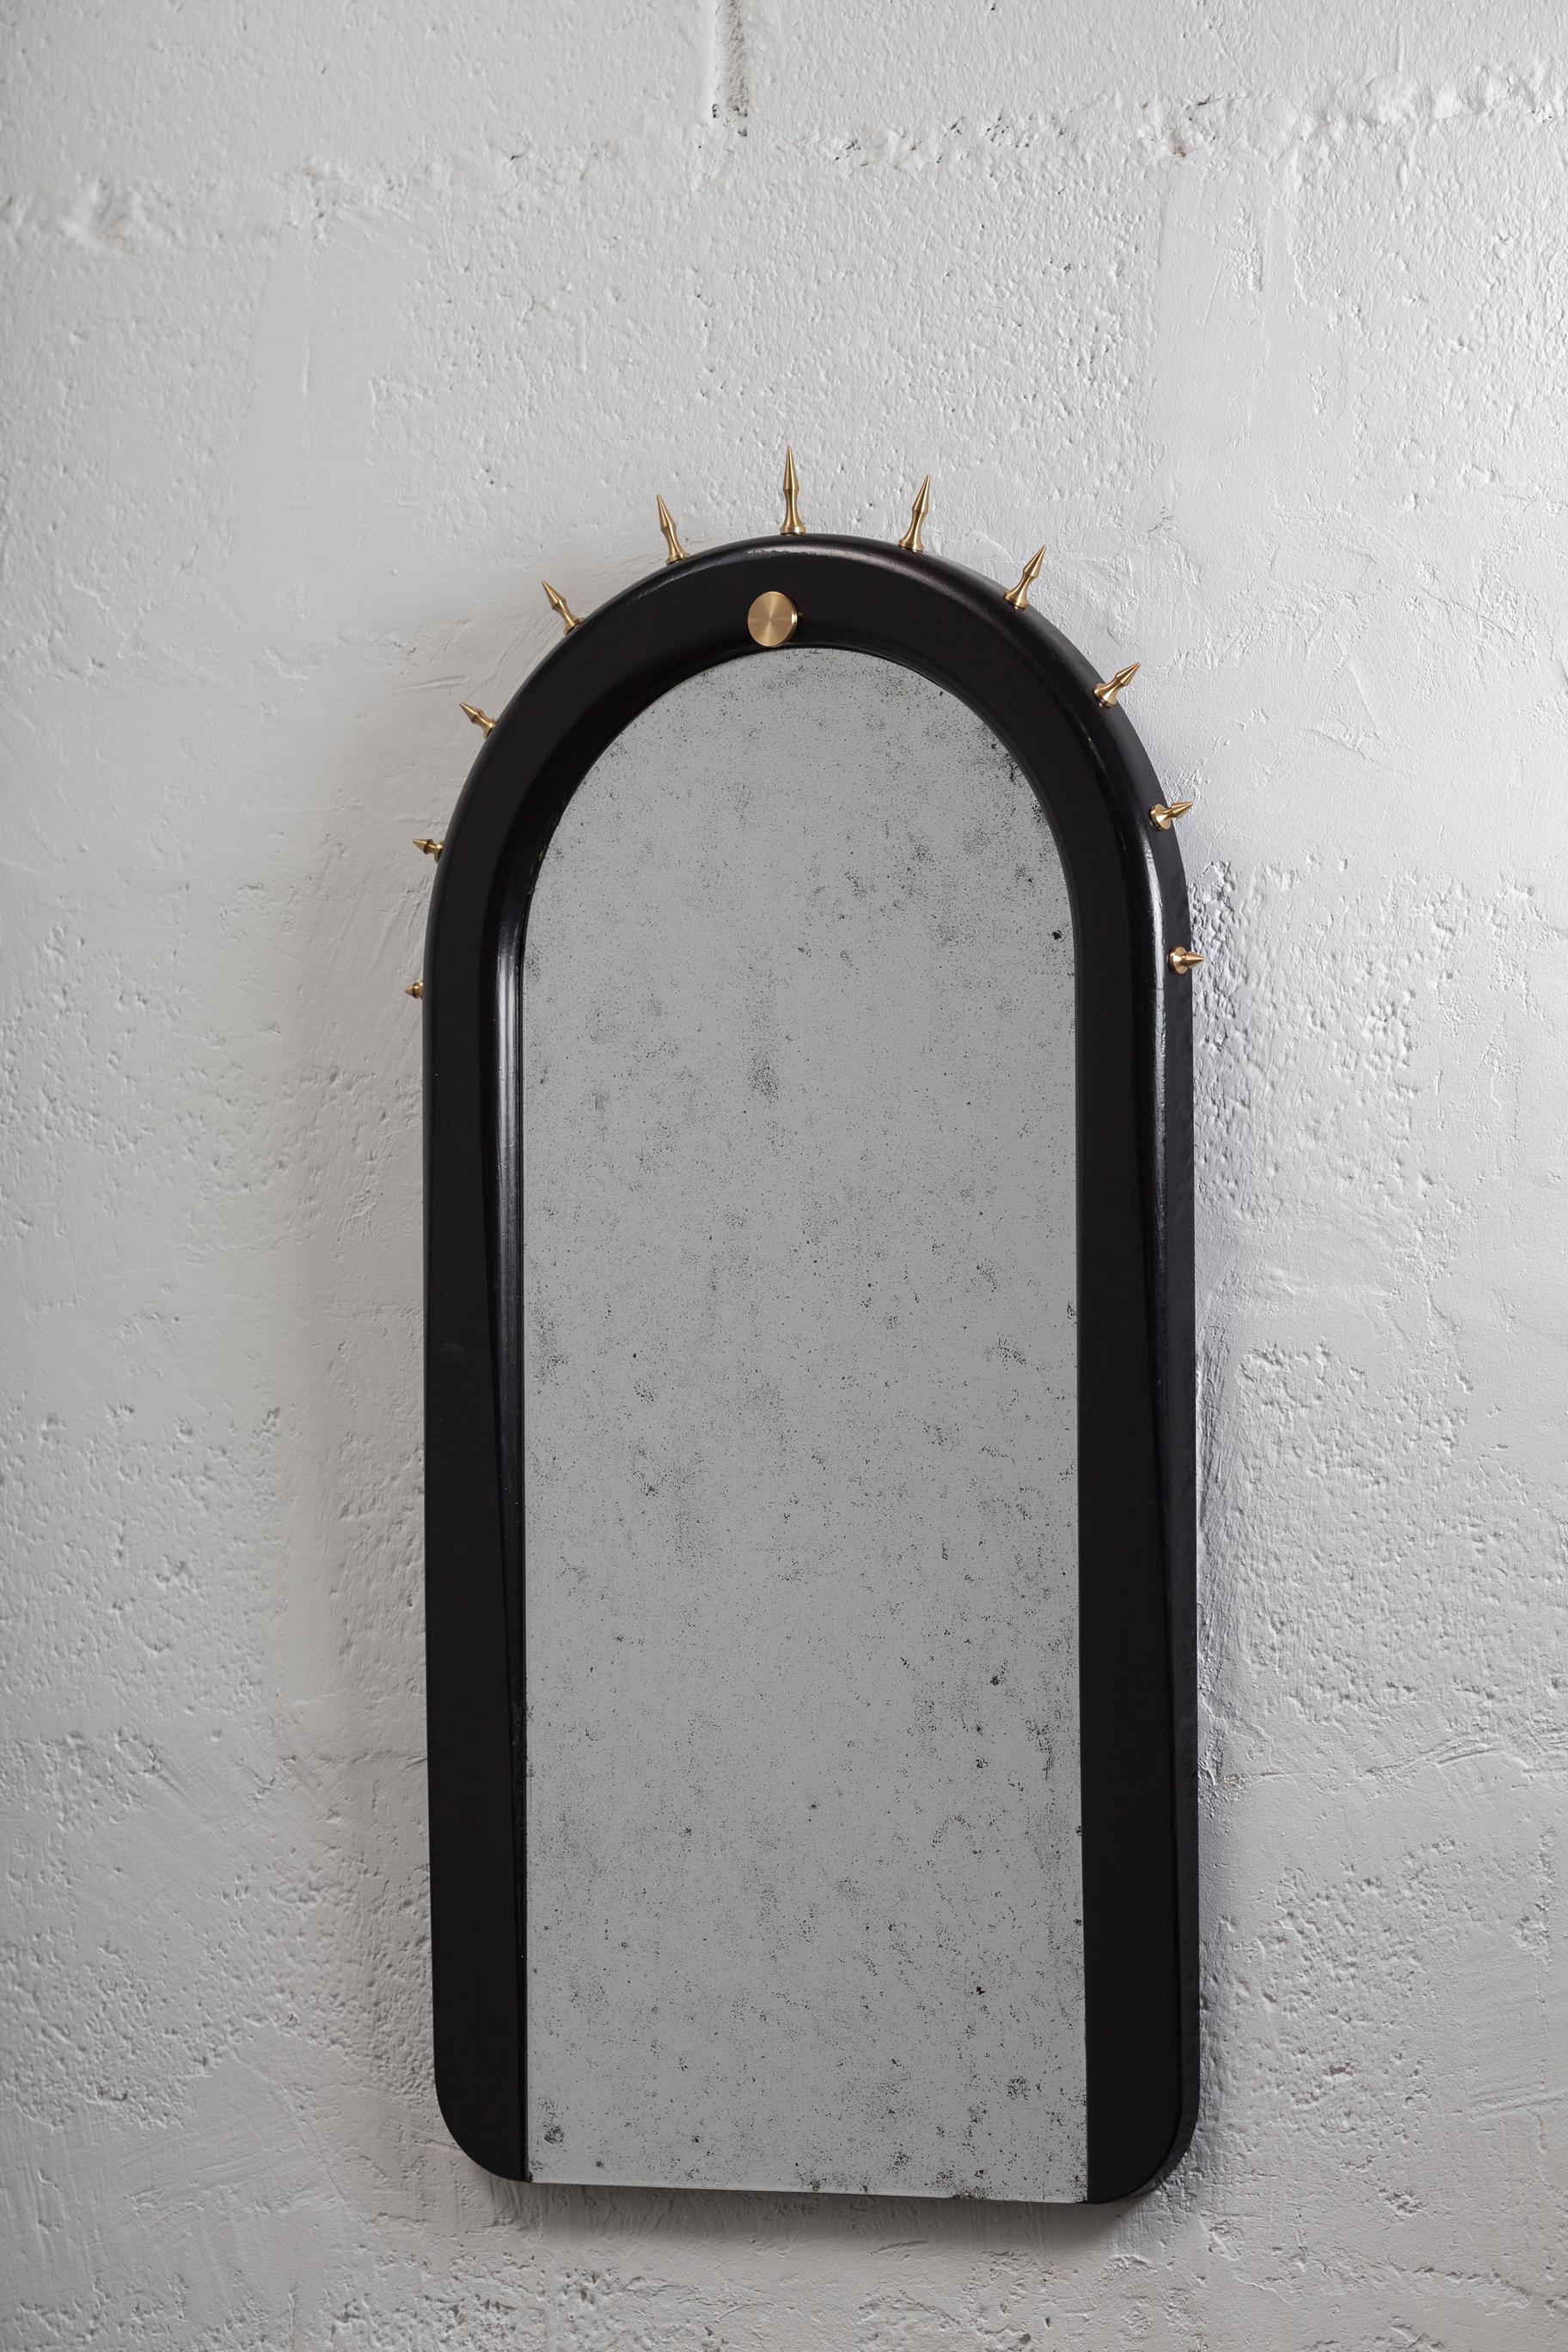 Sitiera_01 Wall Mirror in Solid Wood by ANDEAN, Represented by Tuleste Factory In New Condition For Sale In New York, NY